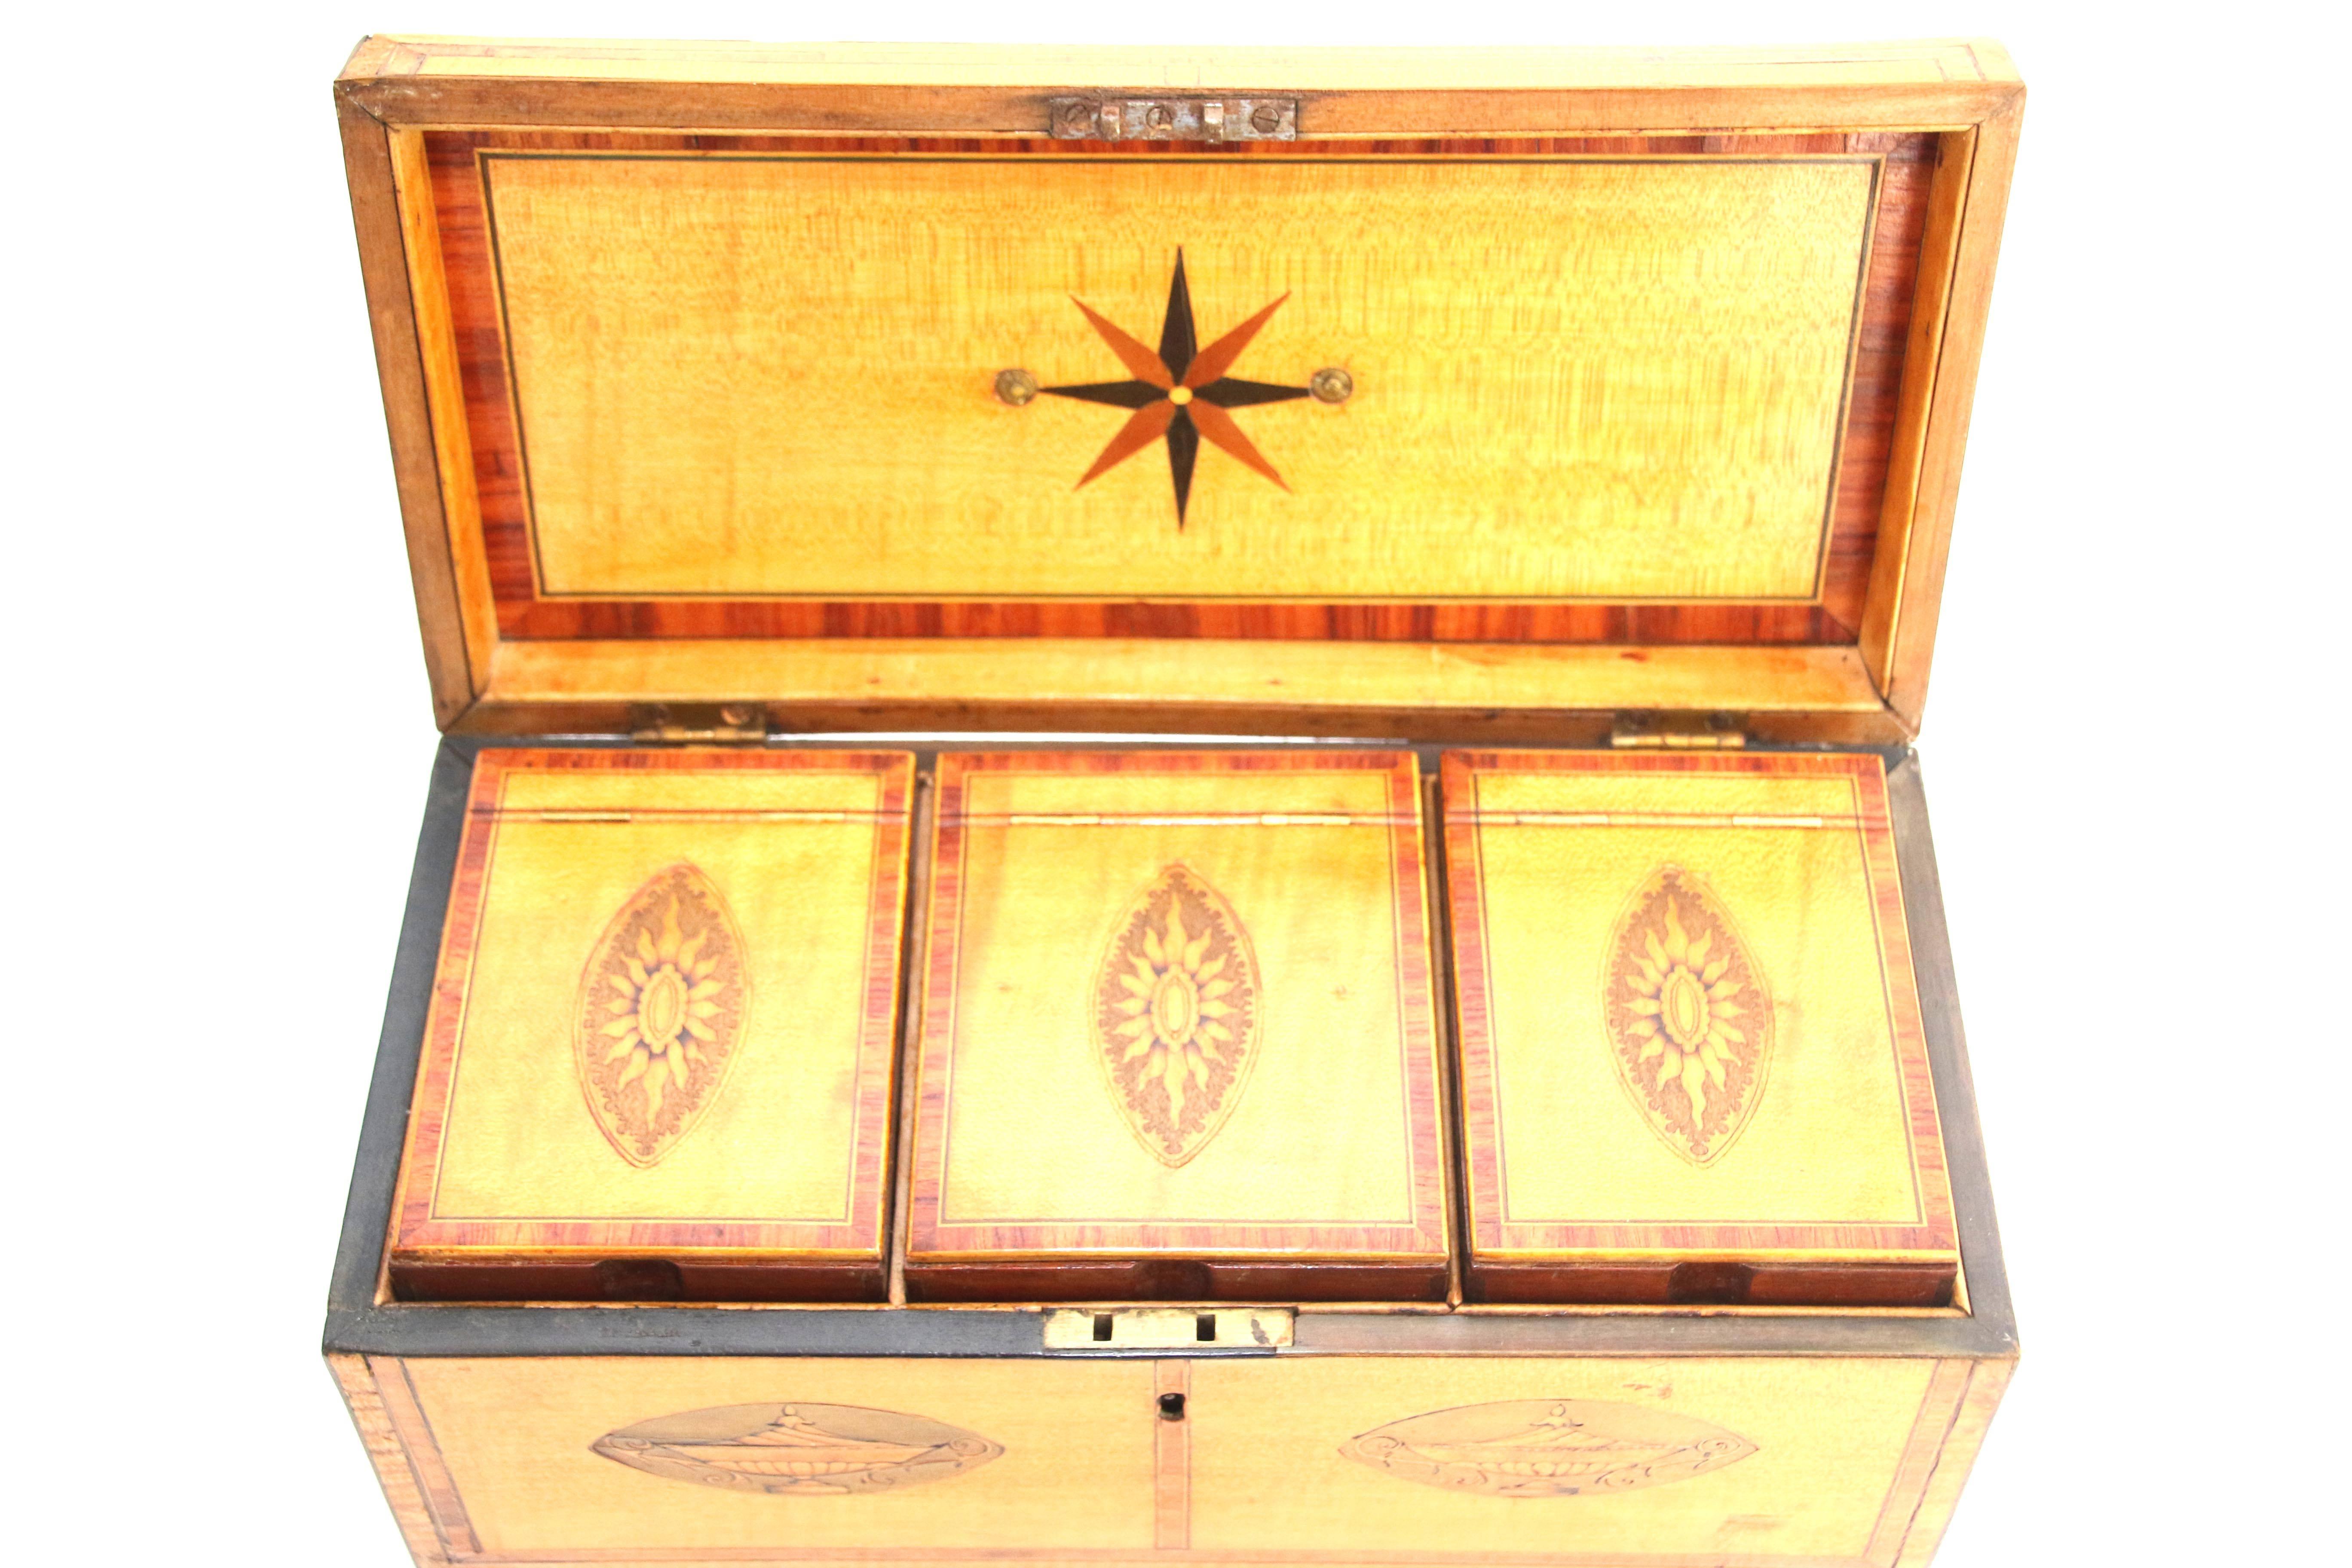 British 18th Century Satinwood Tea Caddy with Oval Inlaid Panels